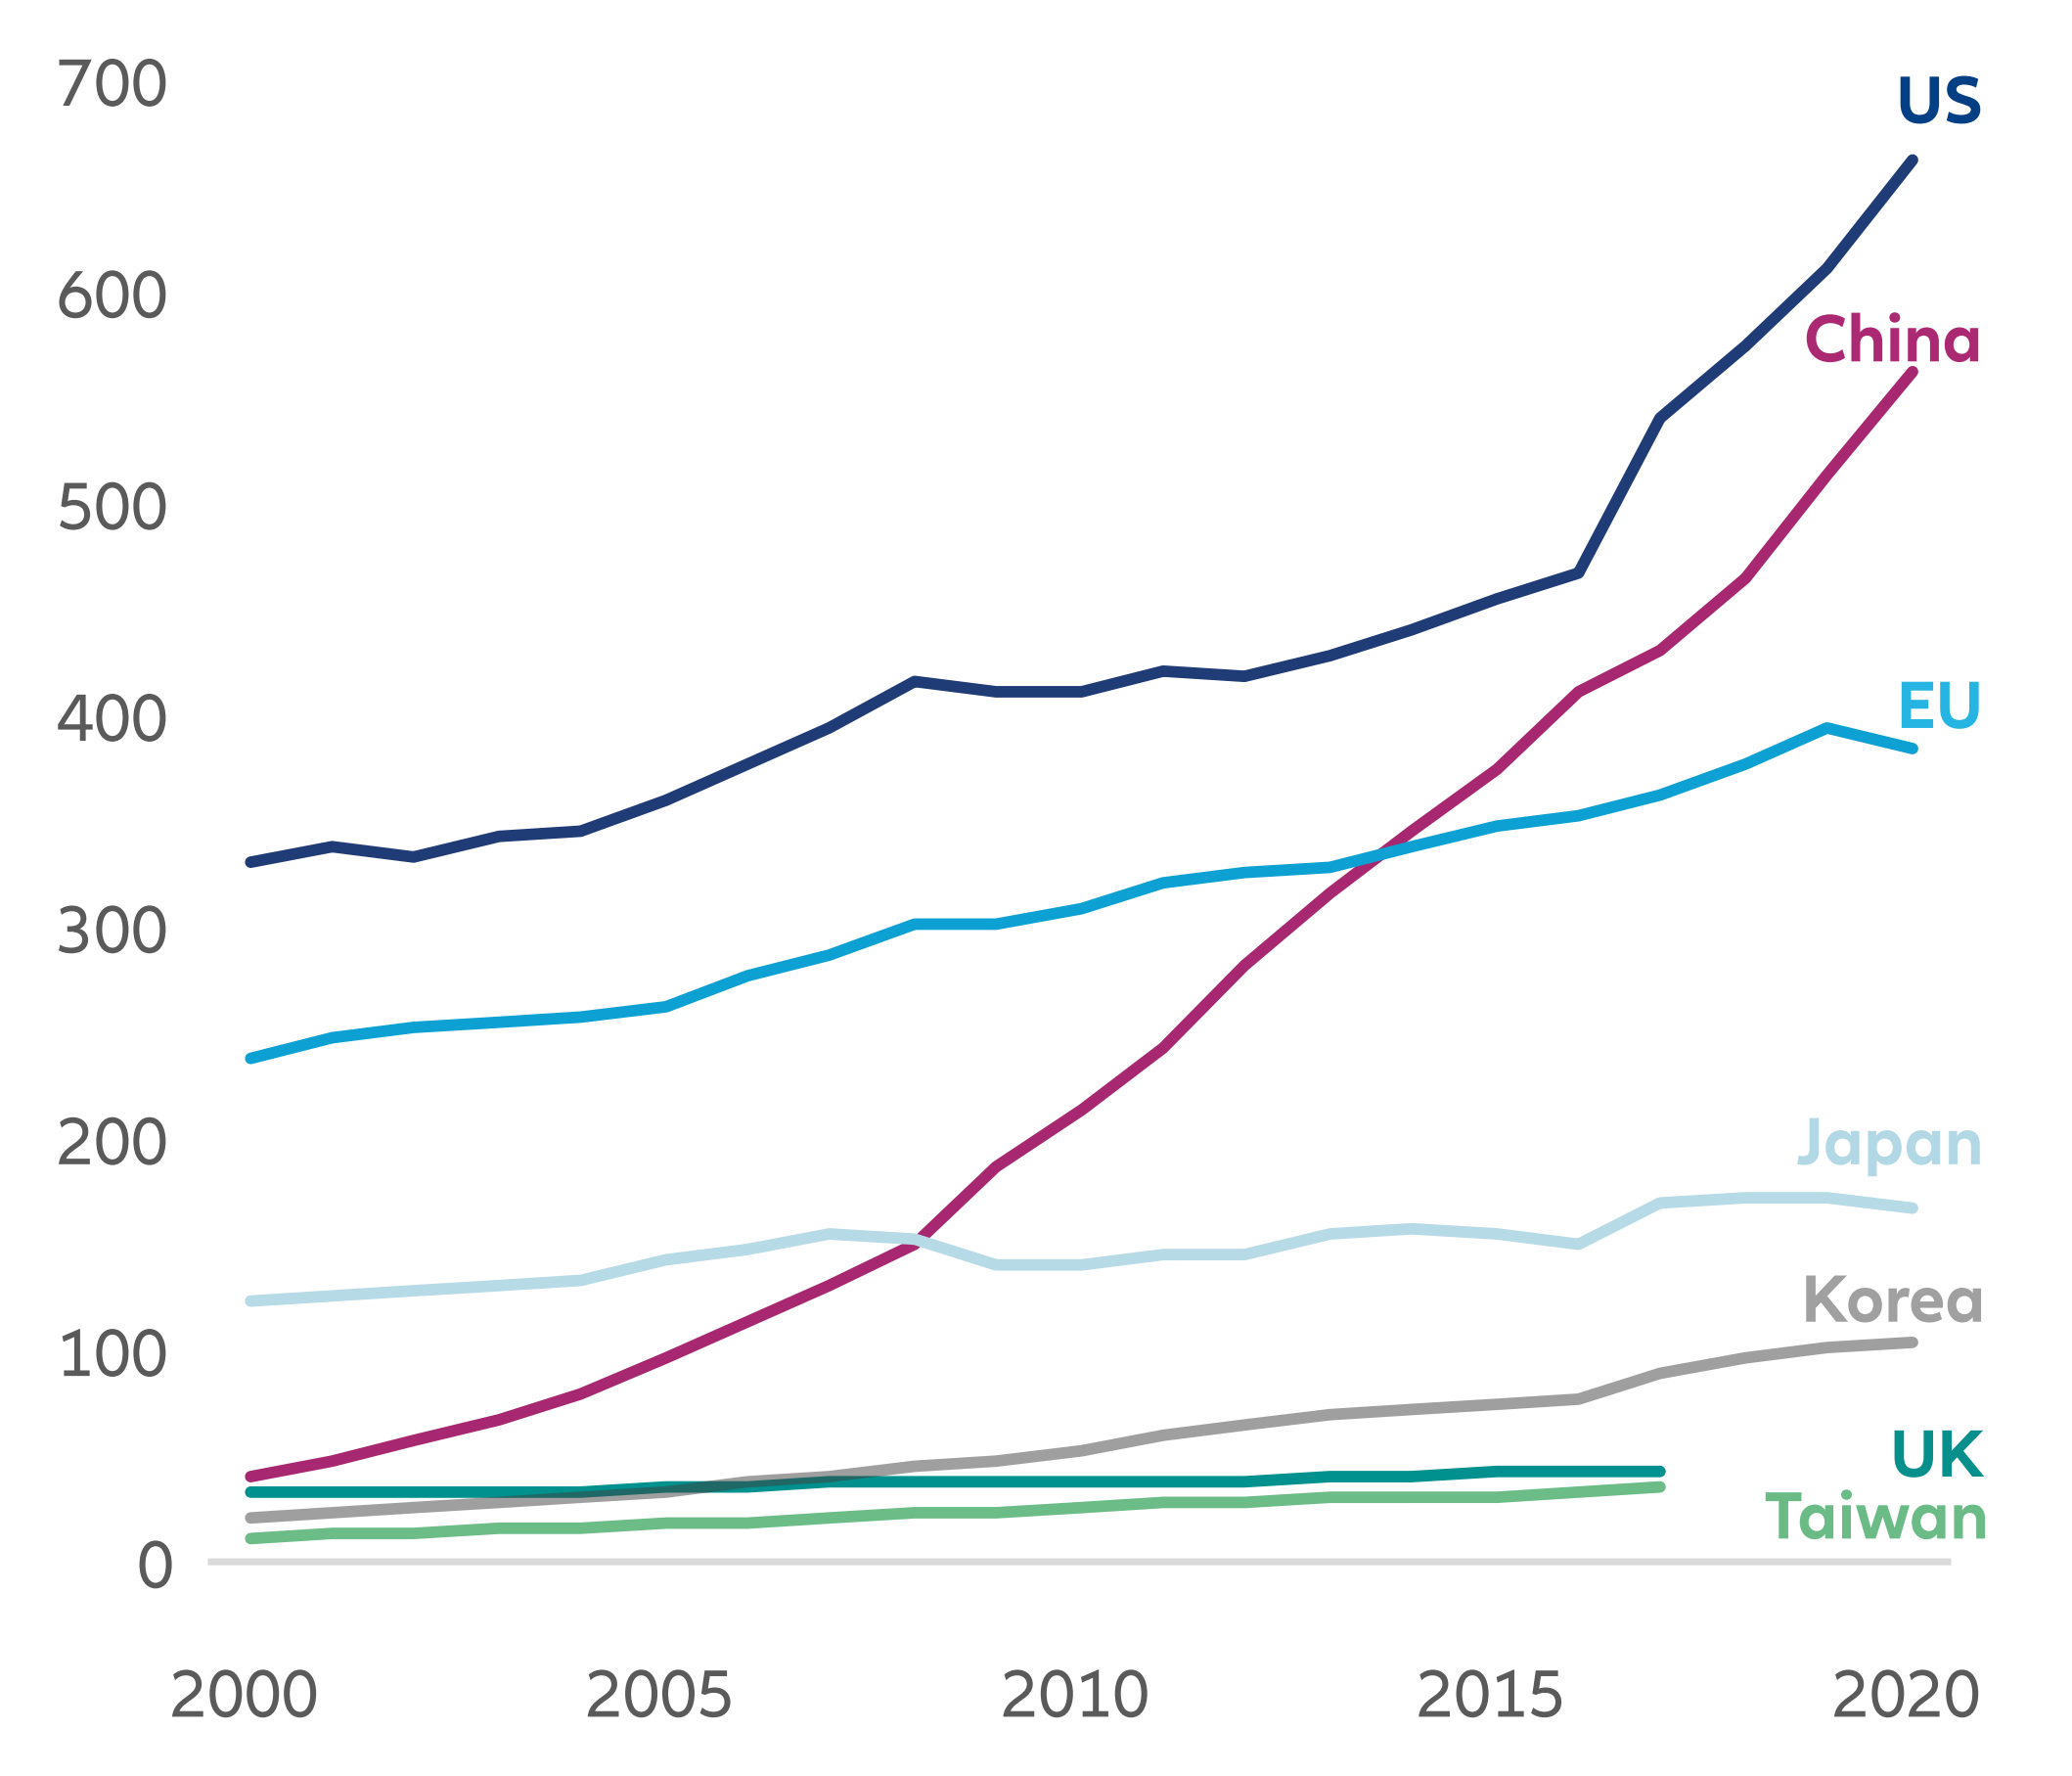 Exhibit 2: Global R&D expenditure and growth (USD thousand)